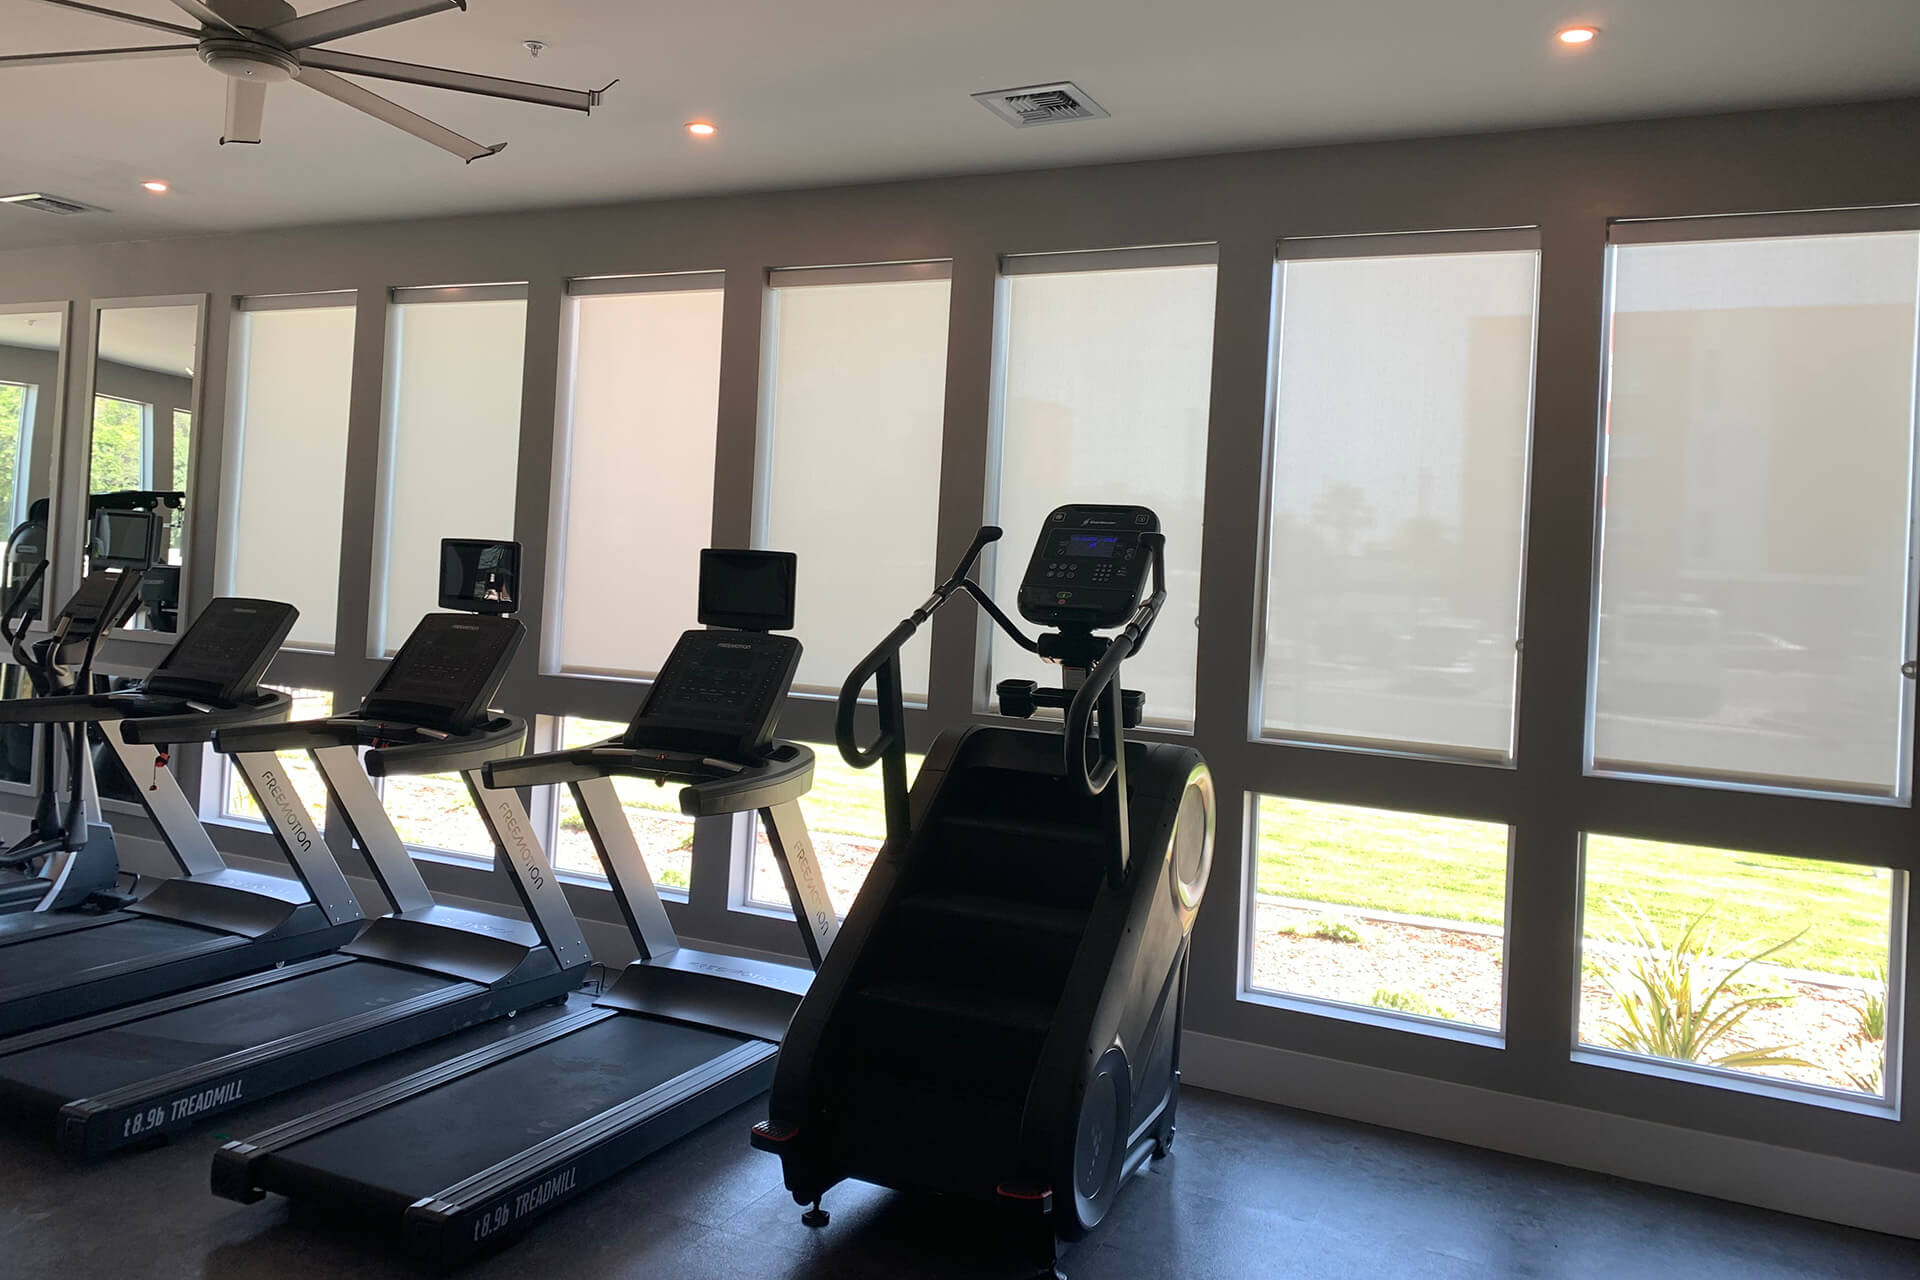 A gym with workout machines facing windows covered with roller shades.